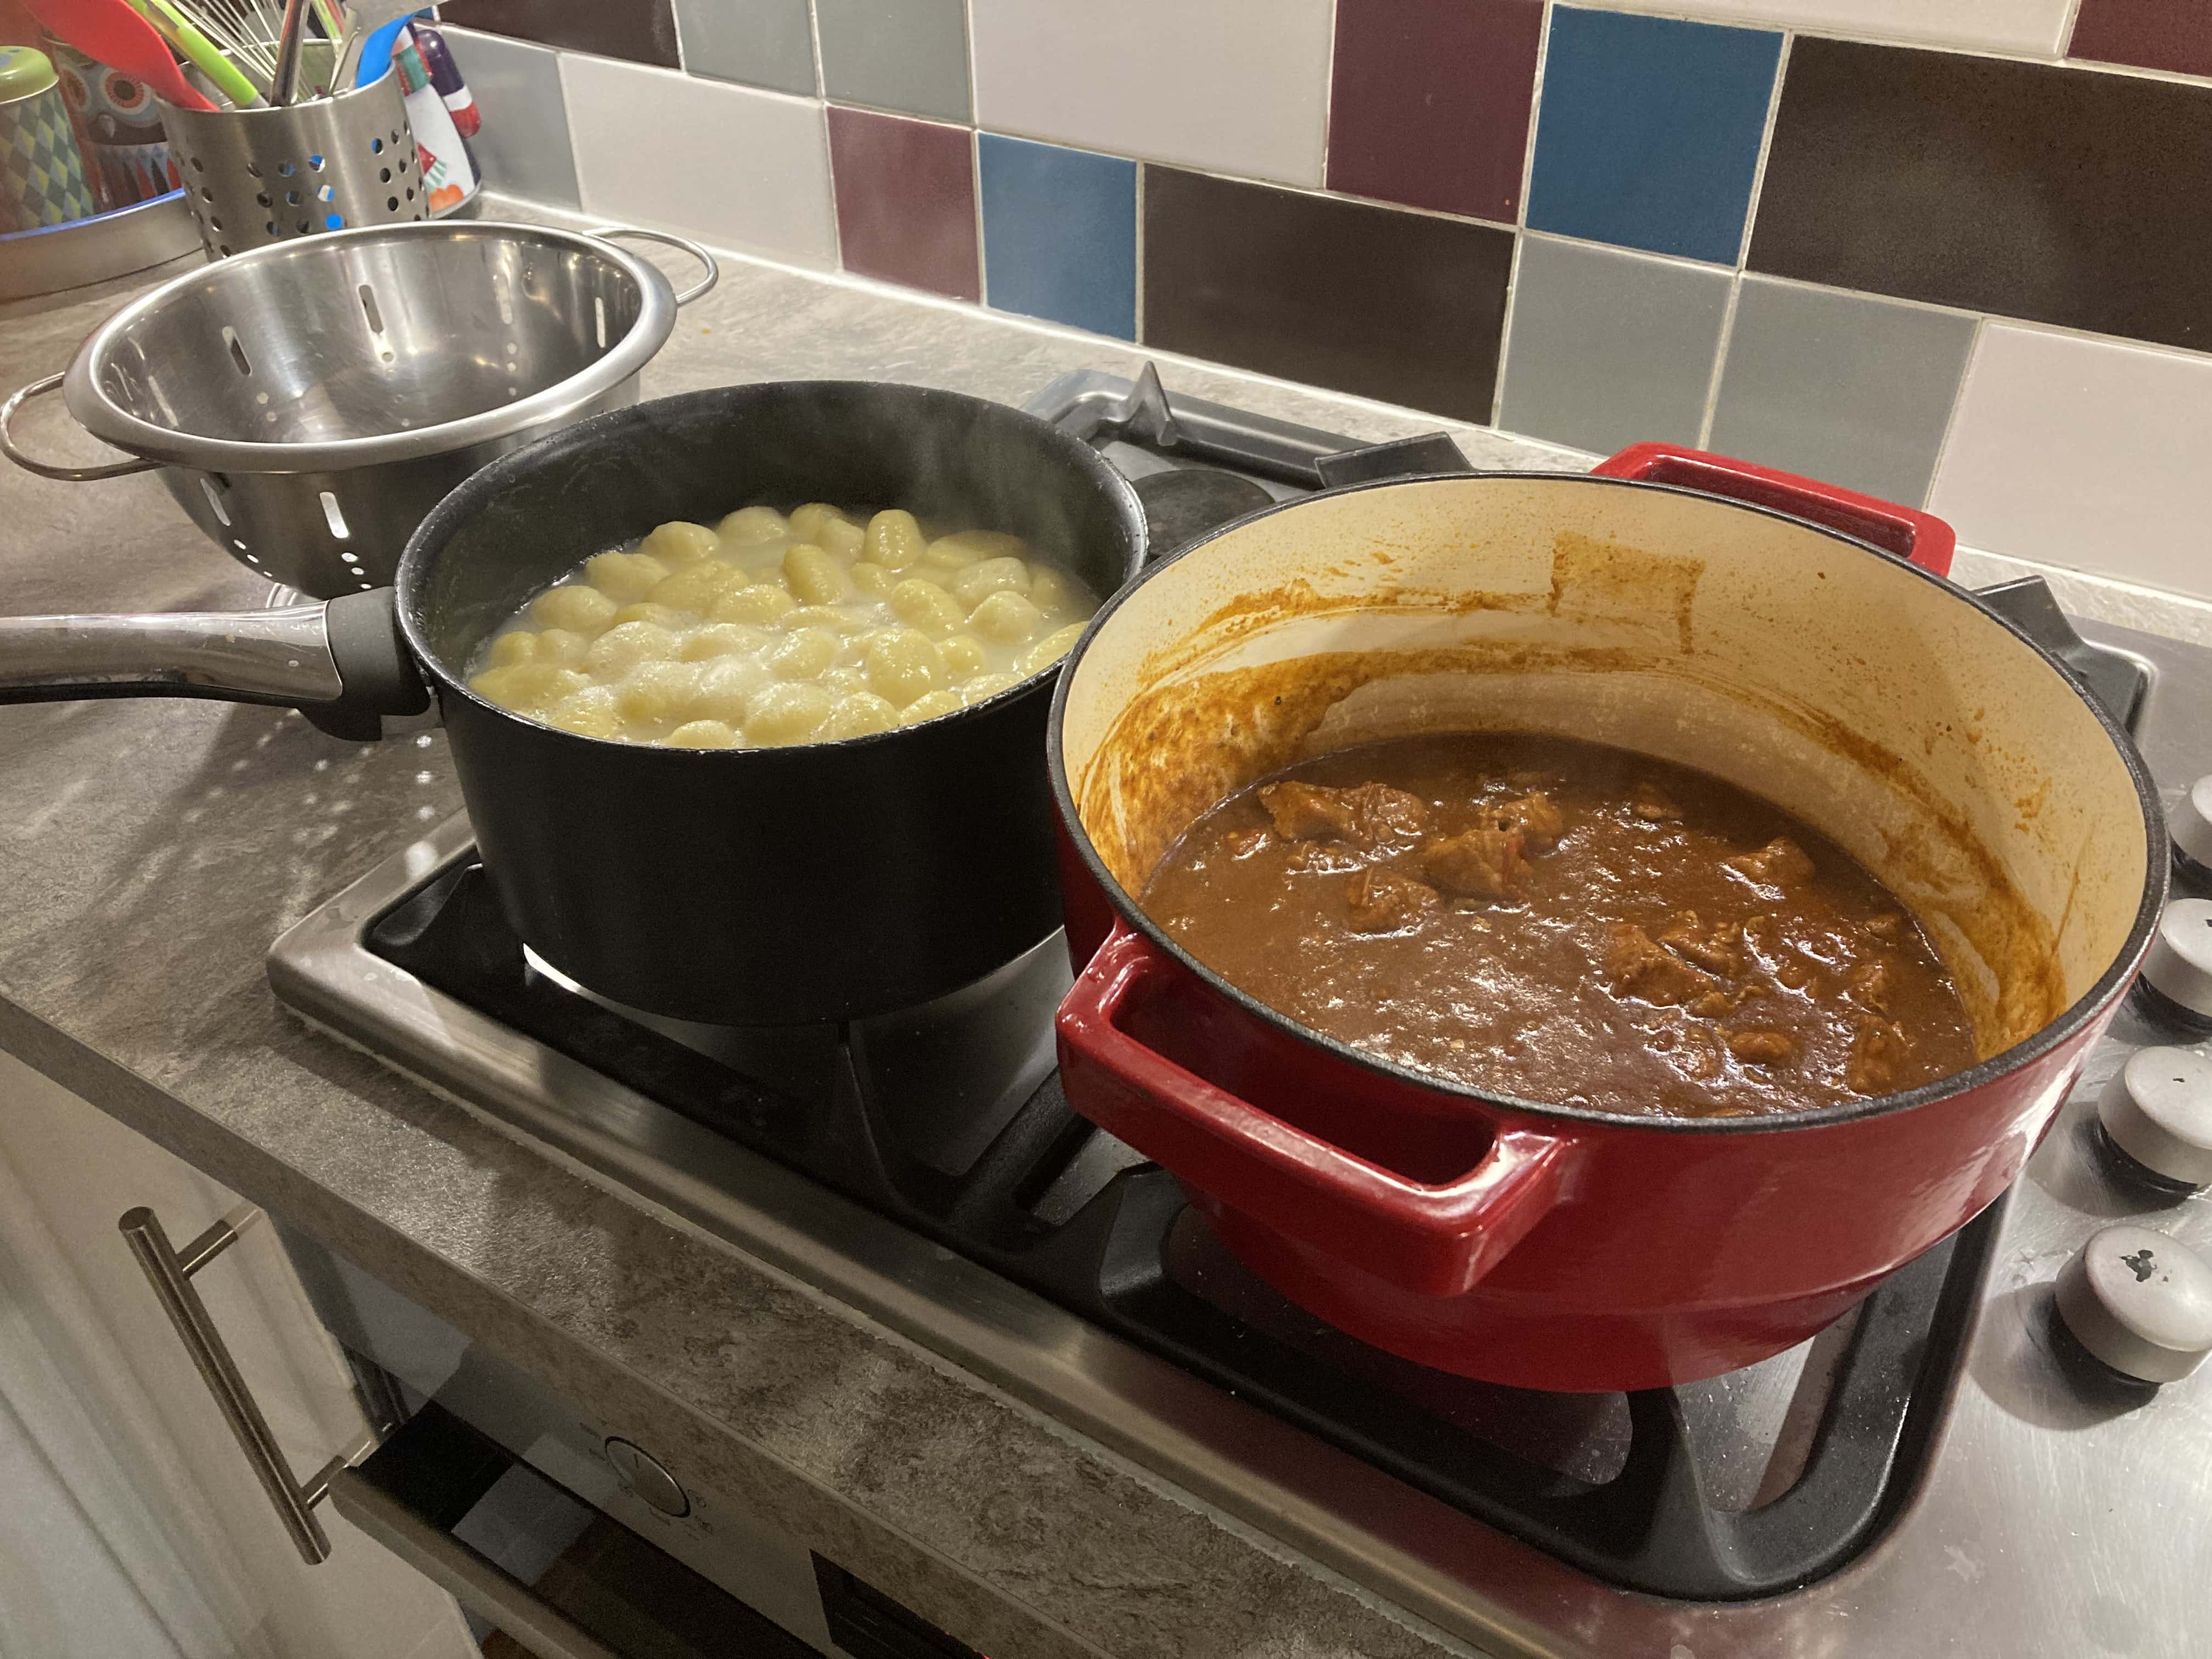 Goulash in a big red dutch oven with some gnocchi cooking in a pot next to it